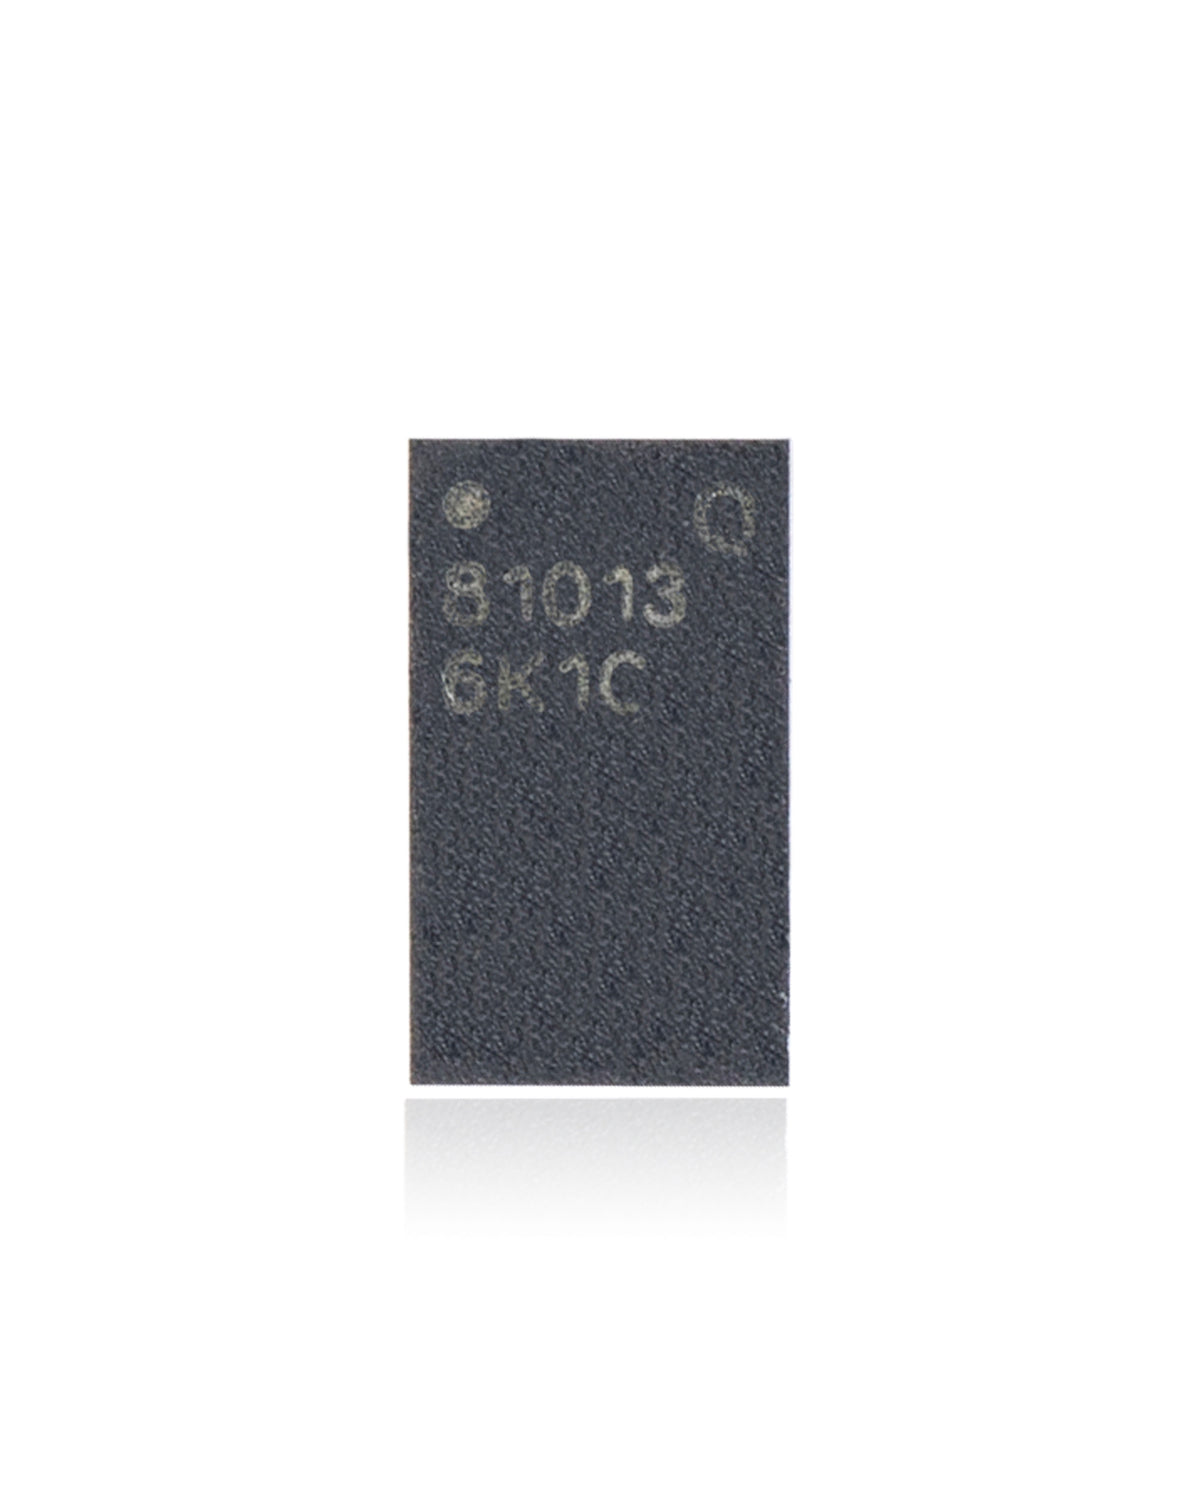 POWER AMPLIFIER IC COMPATIBLE WITH IPHONE 11 (81013 PA PMU)